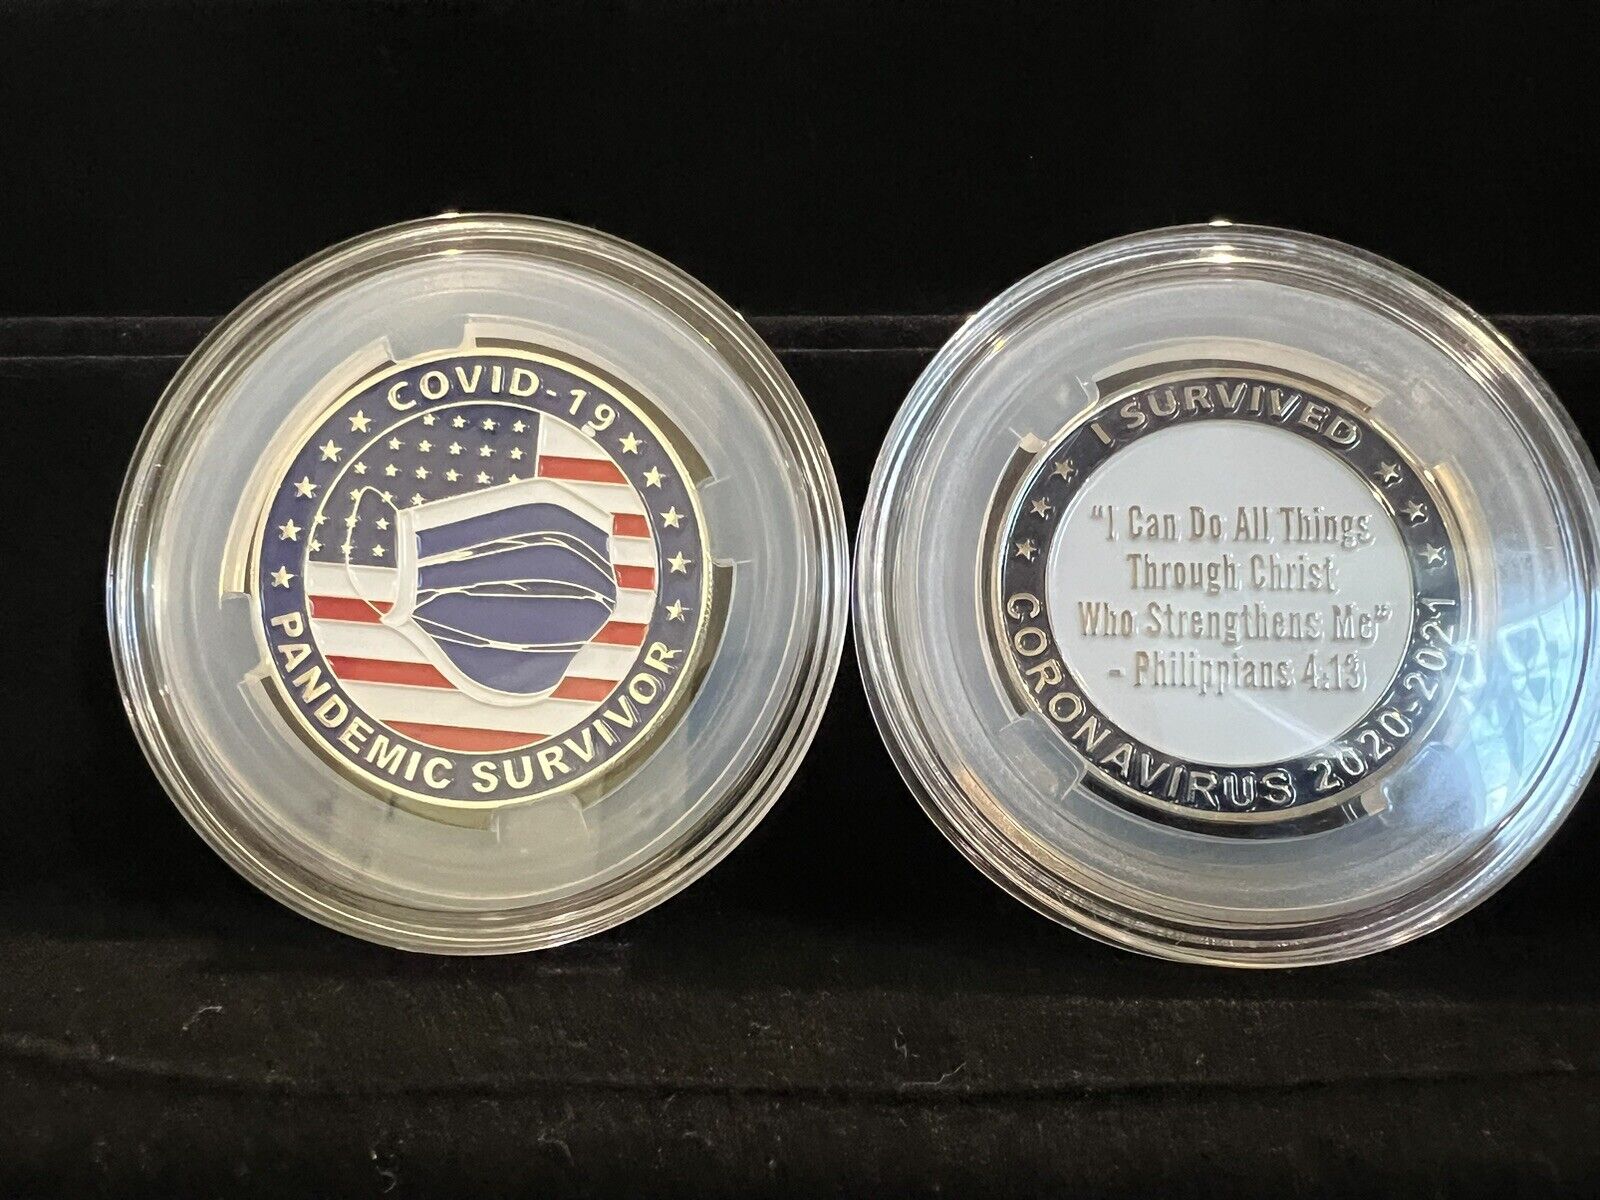 I Survived The 2020 - 2021 Pandemic Challenge Coin (I Survived COVID)